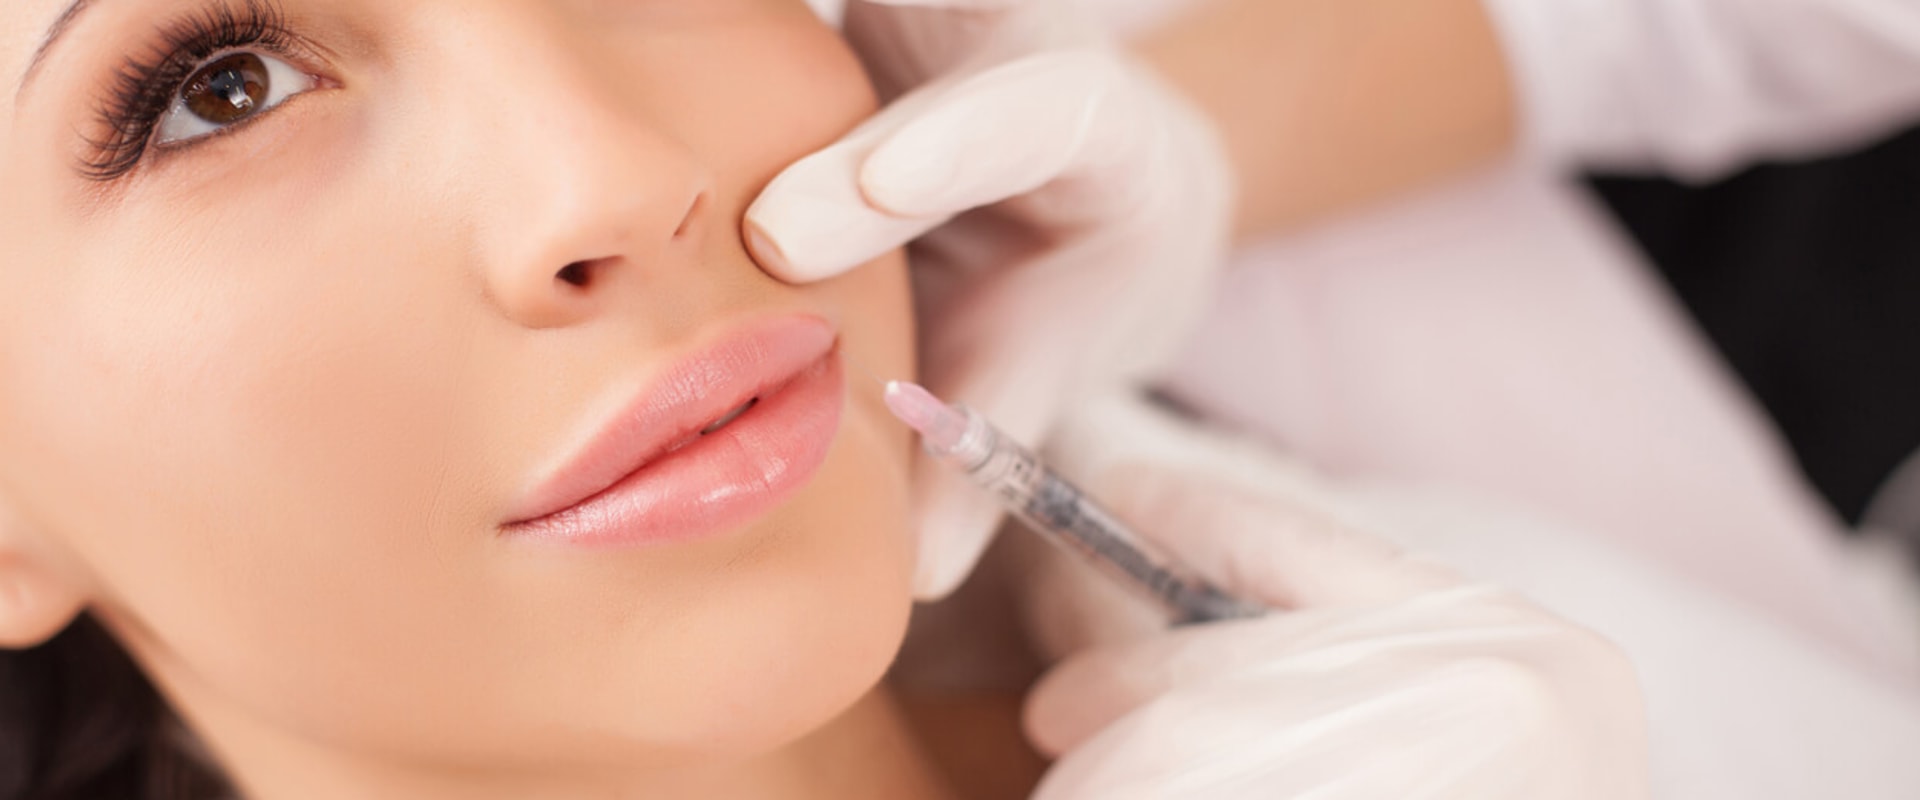 Which Injectable Filler Lasts the Longest?